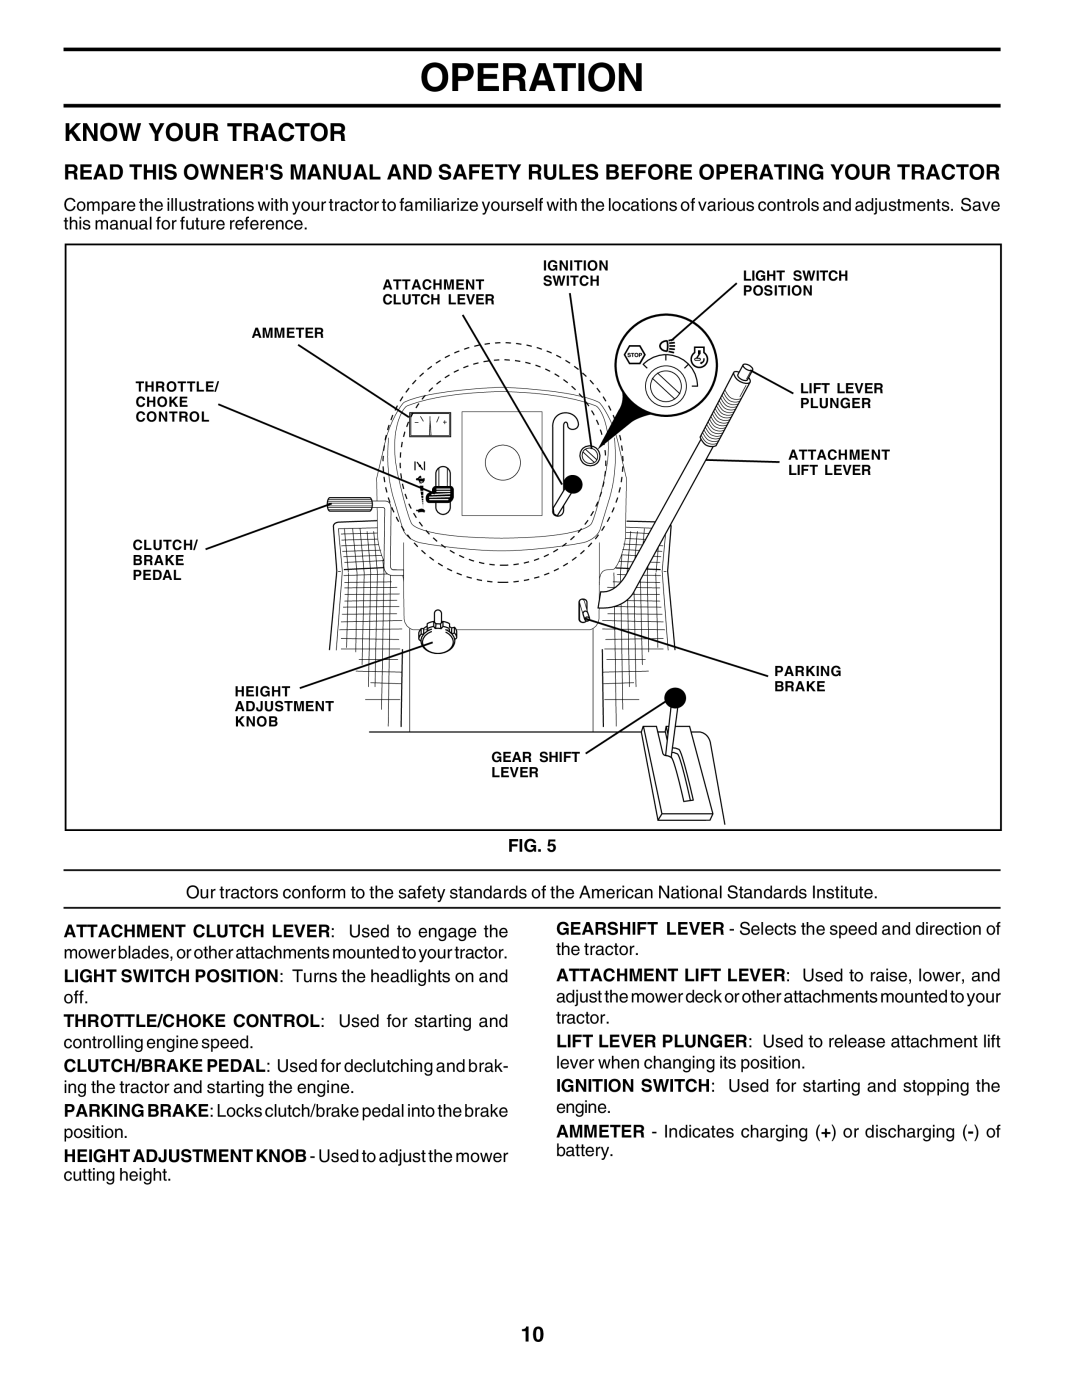 Poulan PR1742STF owner manual Know Your Tractor, Operation 